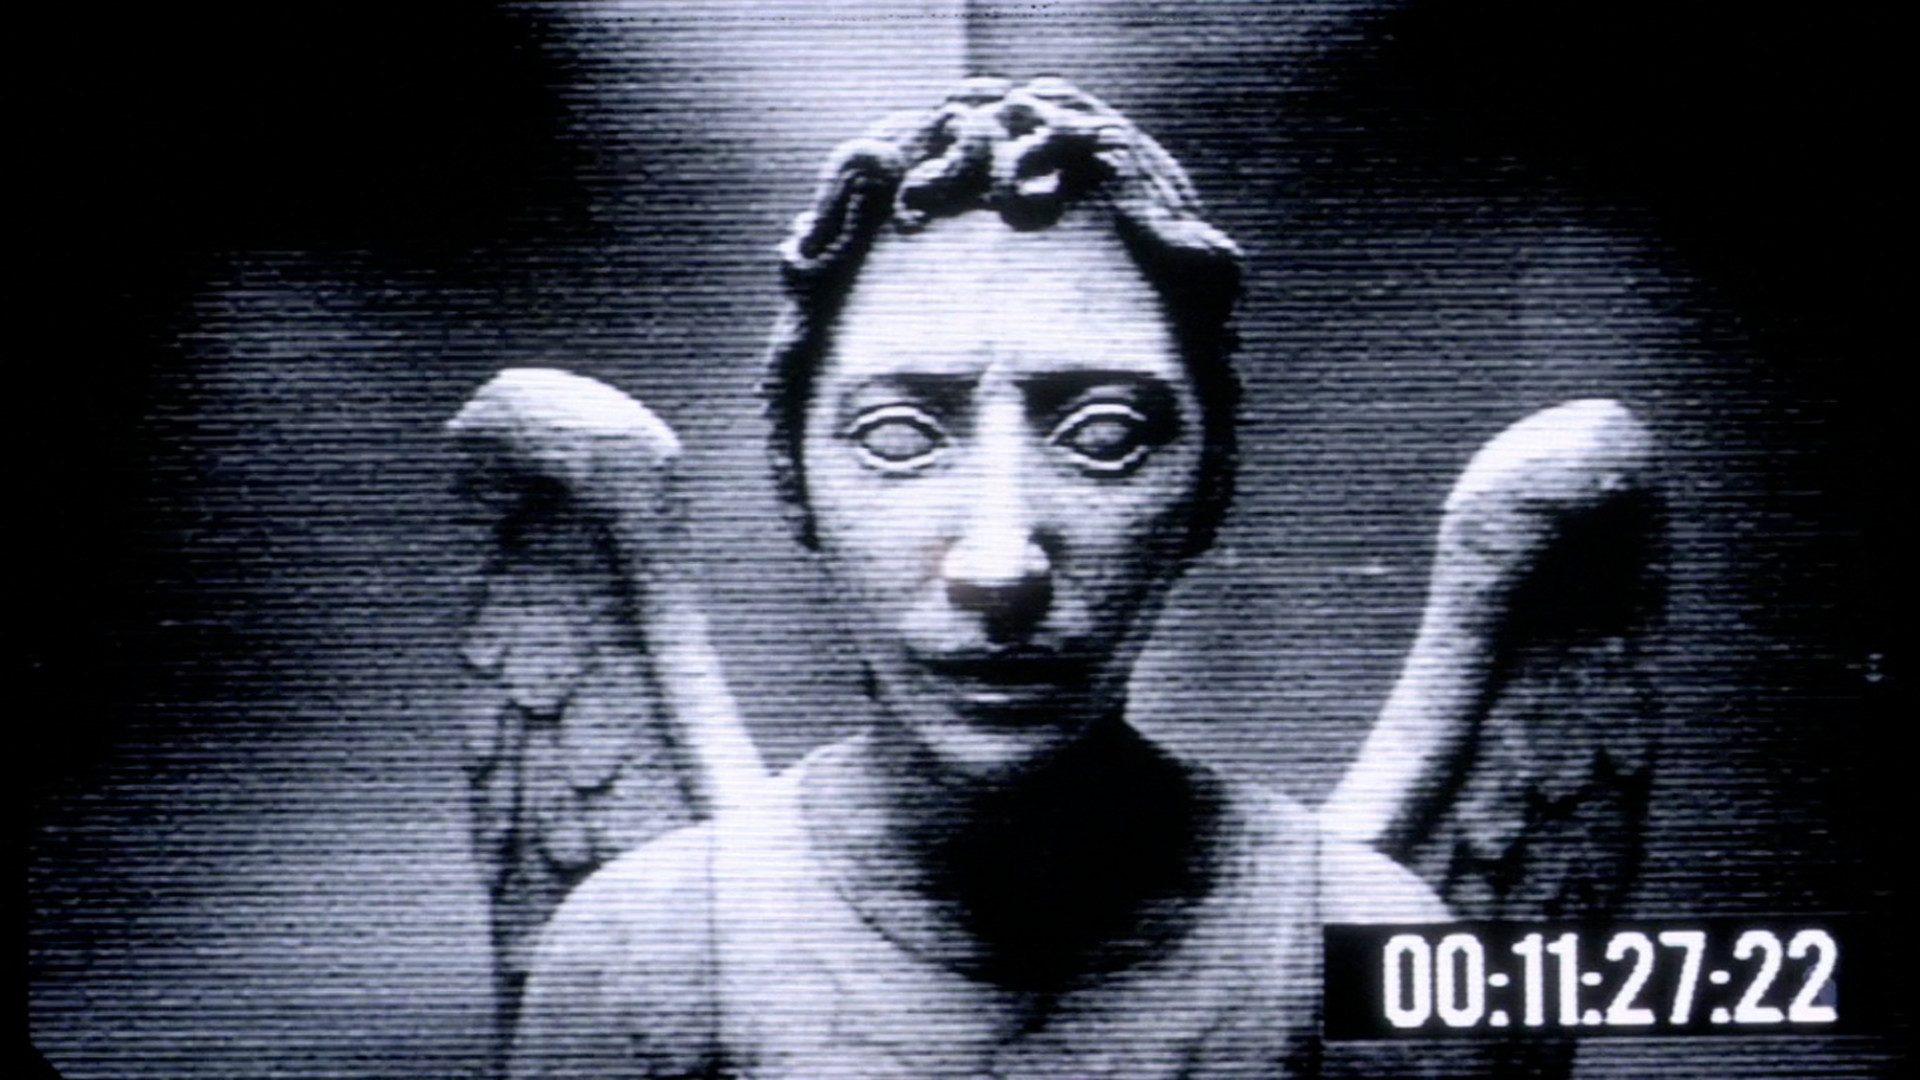 1920x1080 HQFX-Weeping Angels | Stunning Weeping Angels Wallpapers